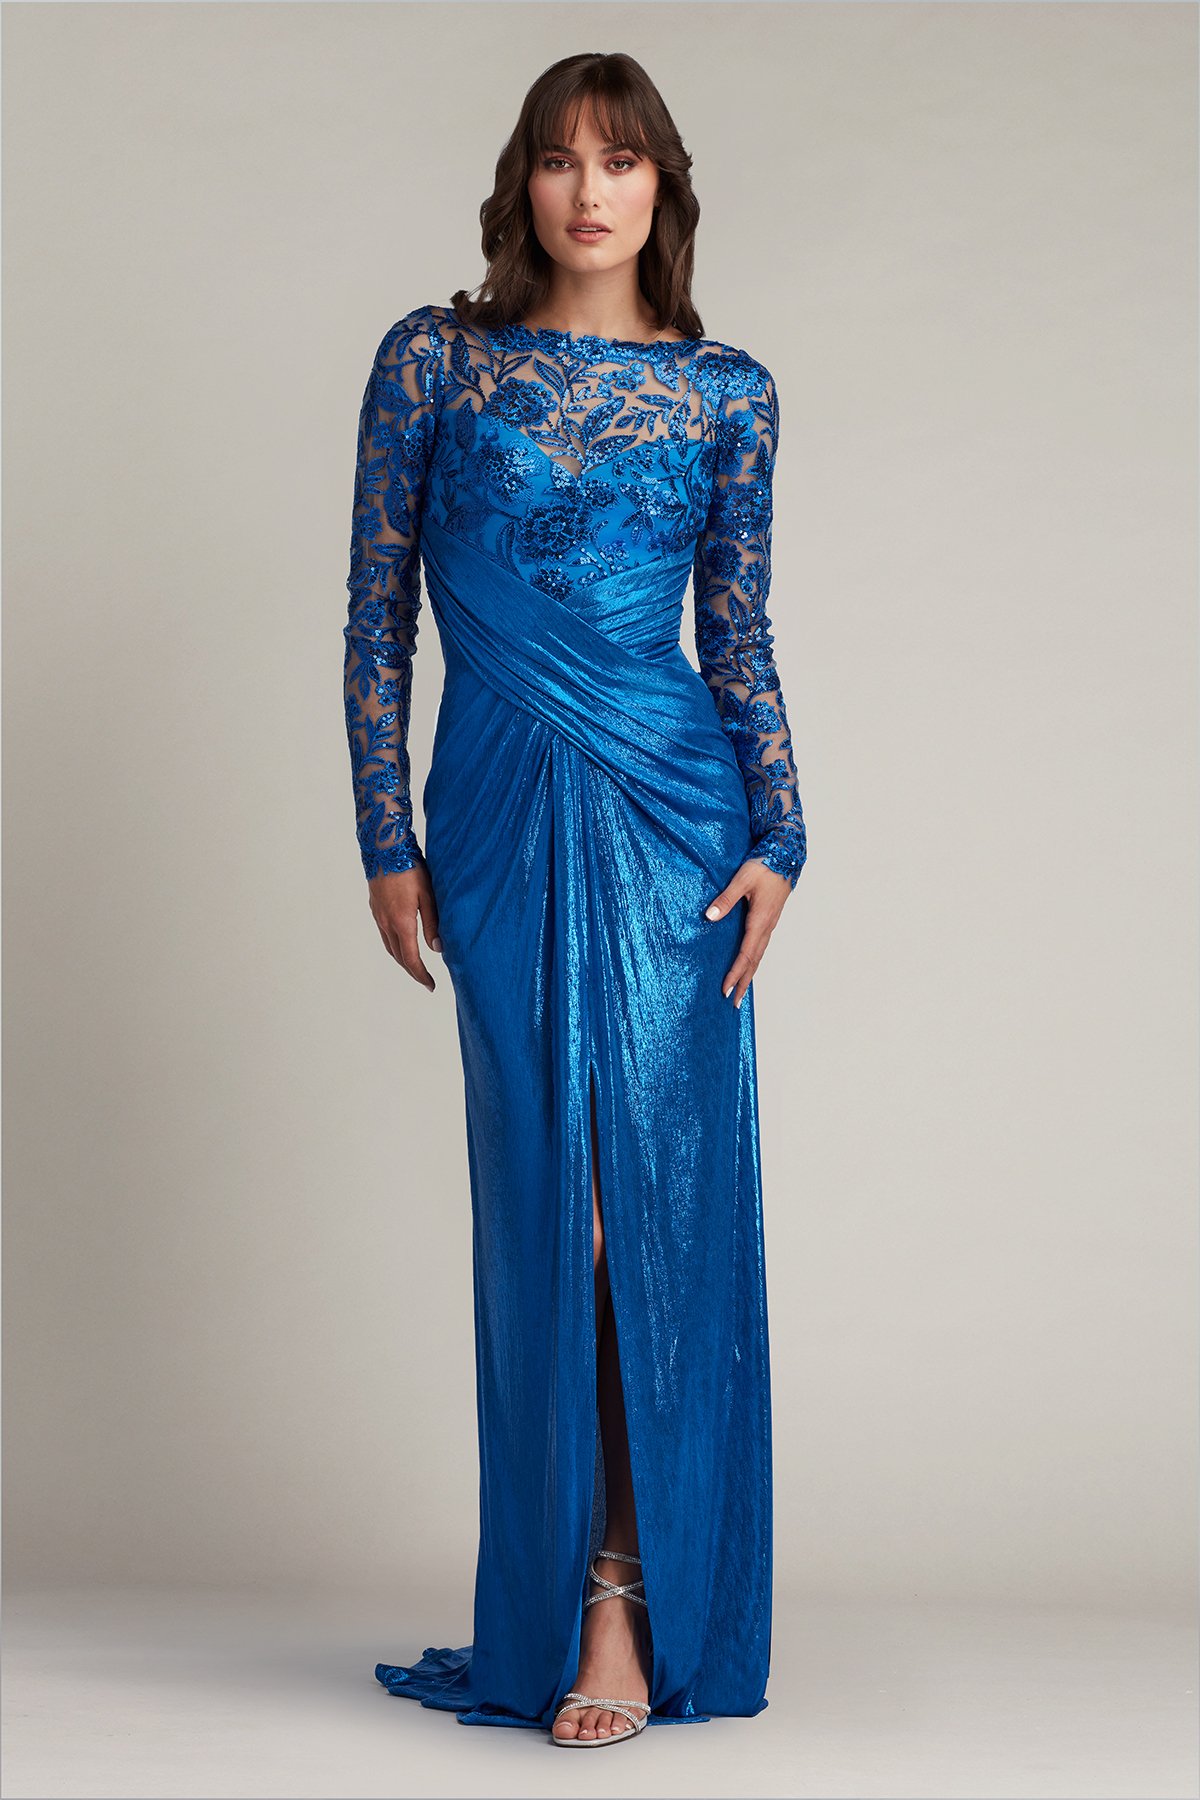 Veder Draped Illusion Gown